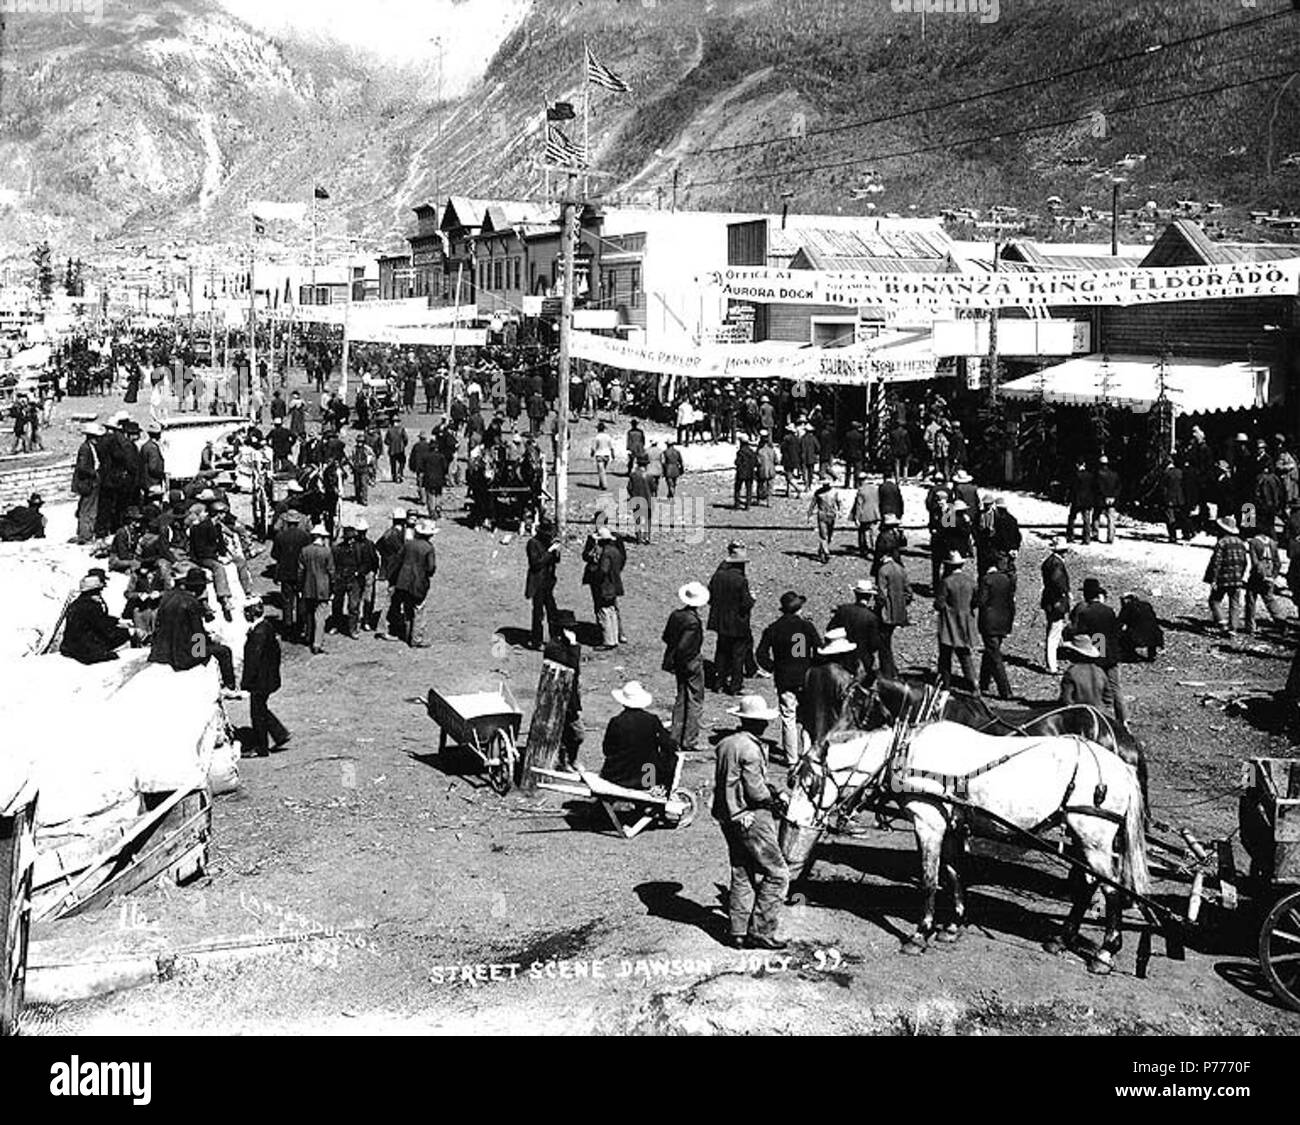 . English: Front Street, Dawson, Yukon Territory, July 1899. English: Shows crowded street scene with advertising banners strung across the street . Caption on image: 'Street scene Dawson July 99' Original photograph by Eric A. Hegg 2333; copied by Larss and Duclos No. 16 appears in the lower left corner . See Hegg 431 for similar view. Klondike Gold Rush. Subjects (LCTGM): Streets--Yukon--Dawson; Advertisements--Yukon--Dawson; Business districts--Yukon--Dawson Subjects (LCSH): Front Street (Dawson, Yukon)  . 1899 5 Front Street, Dawson, Yukon Territory, July 1899 (HEGG 669) Stock Photo